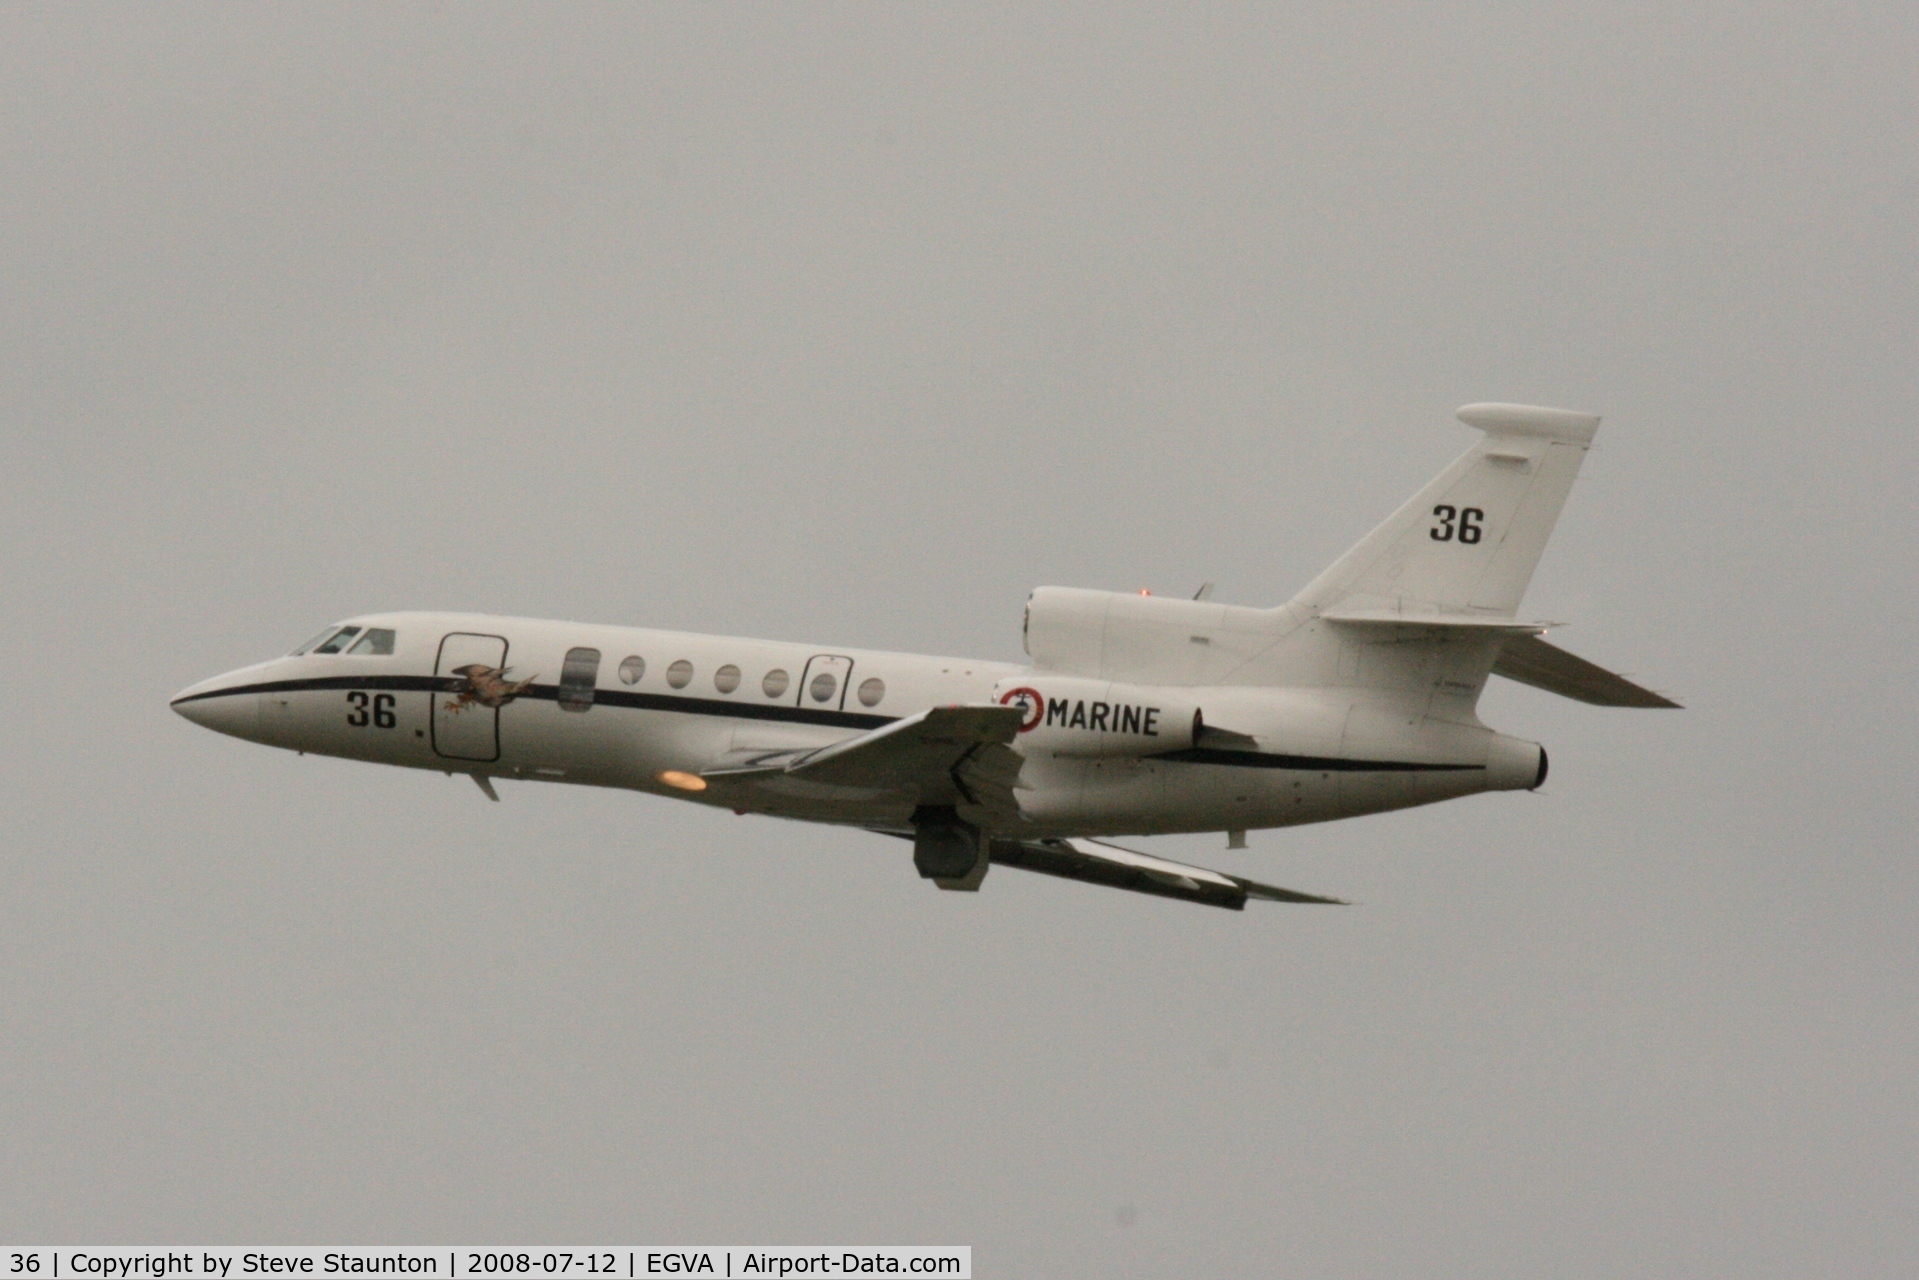 36, 1980 Dassault Falcon 50 C/N 36, Taken at the Royal International Air Tattoo 2008 during arrivals and departures (show days cancelled due to bad weather)